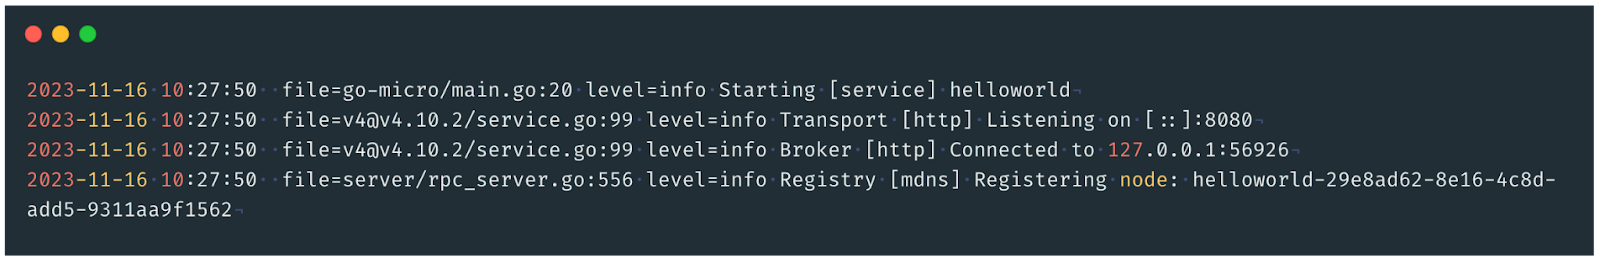 Terminal output showing that a ‘helloworld’ service is running